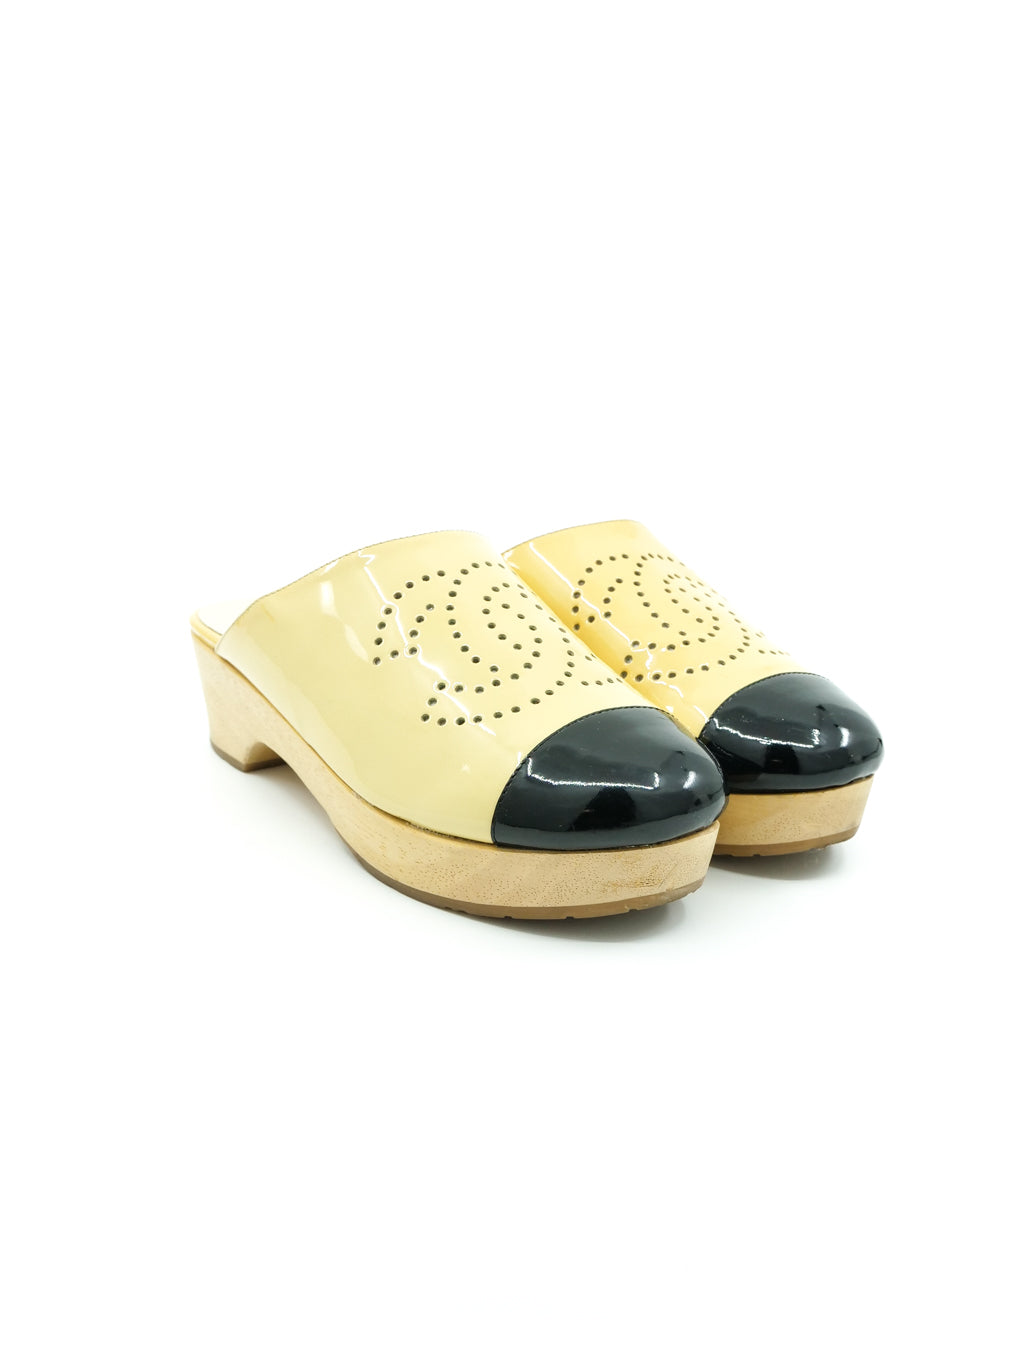 Chanel Perforated Logo Patent Clogs